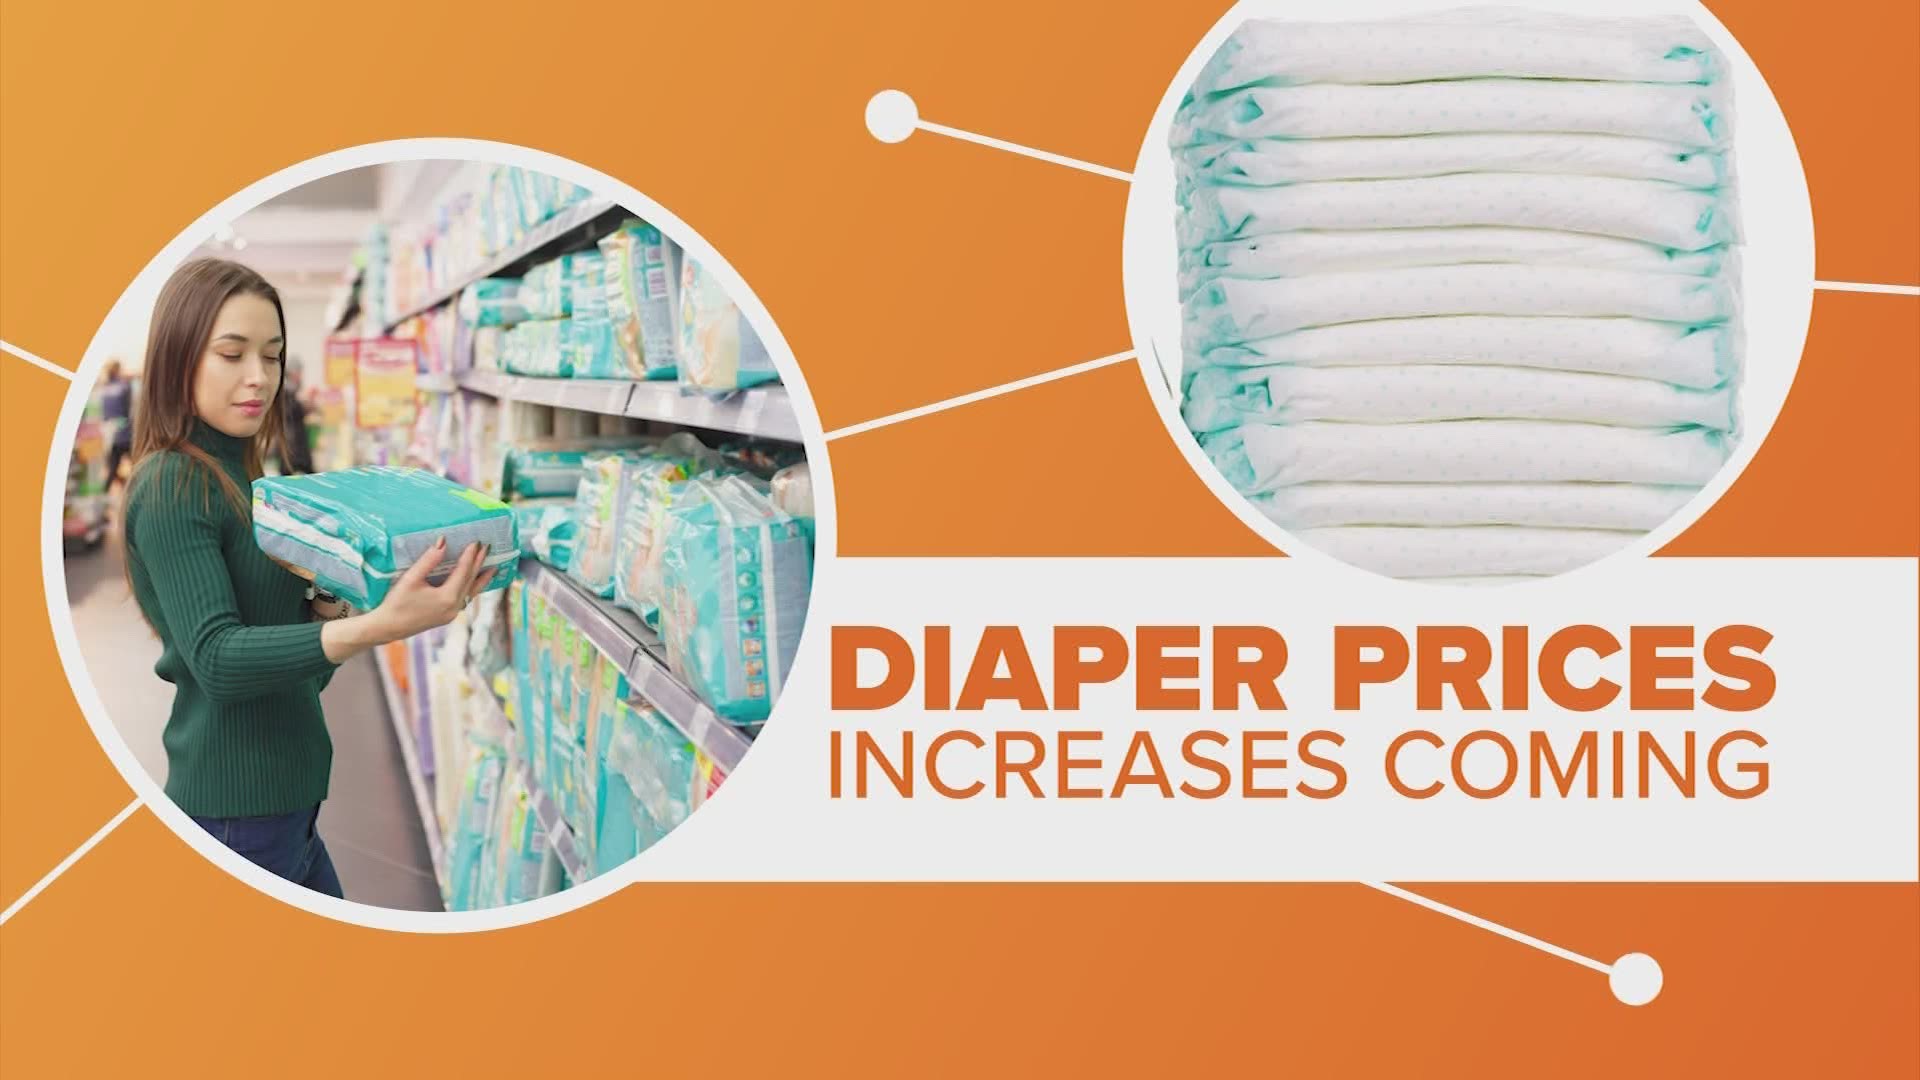 Parents of small children already know this but diapers are expensive, and the bad news is they are about to get even pricier.